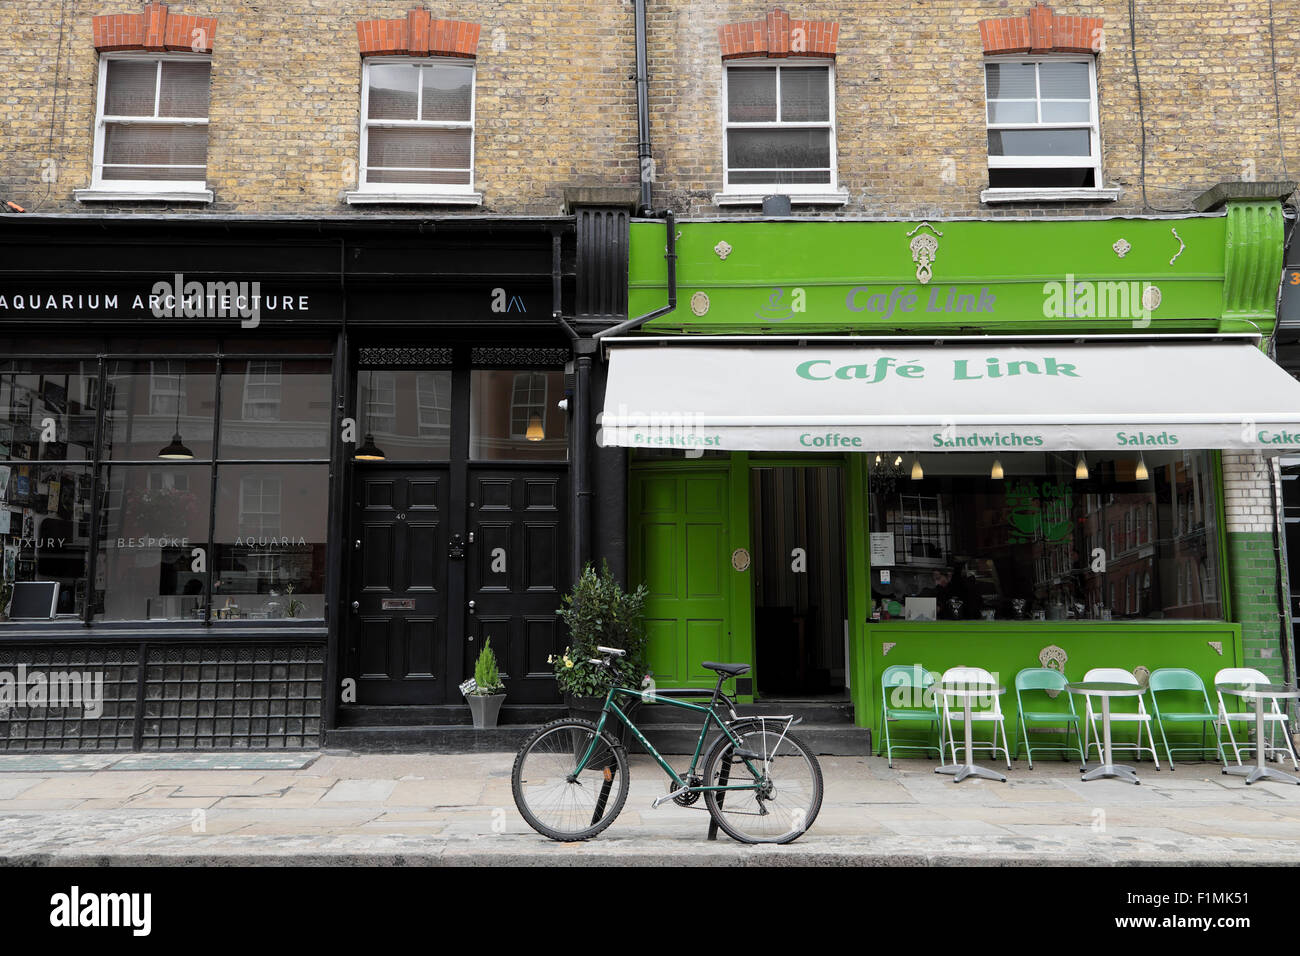 View bike parked outside Cafe Link and Aquarium Architecture on Snowsfields in Bermondsey South London UK  KATHY DEWITT Stock Photo